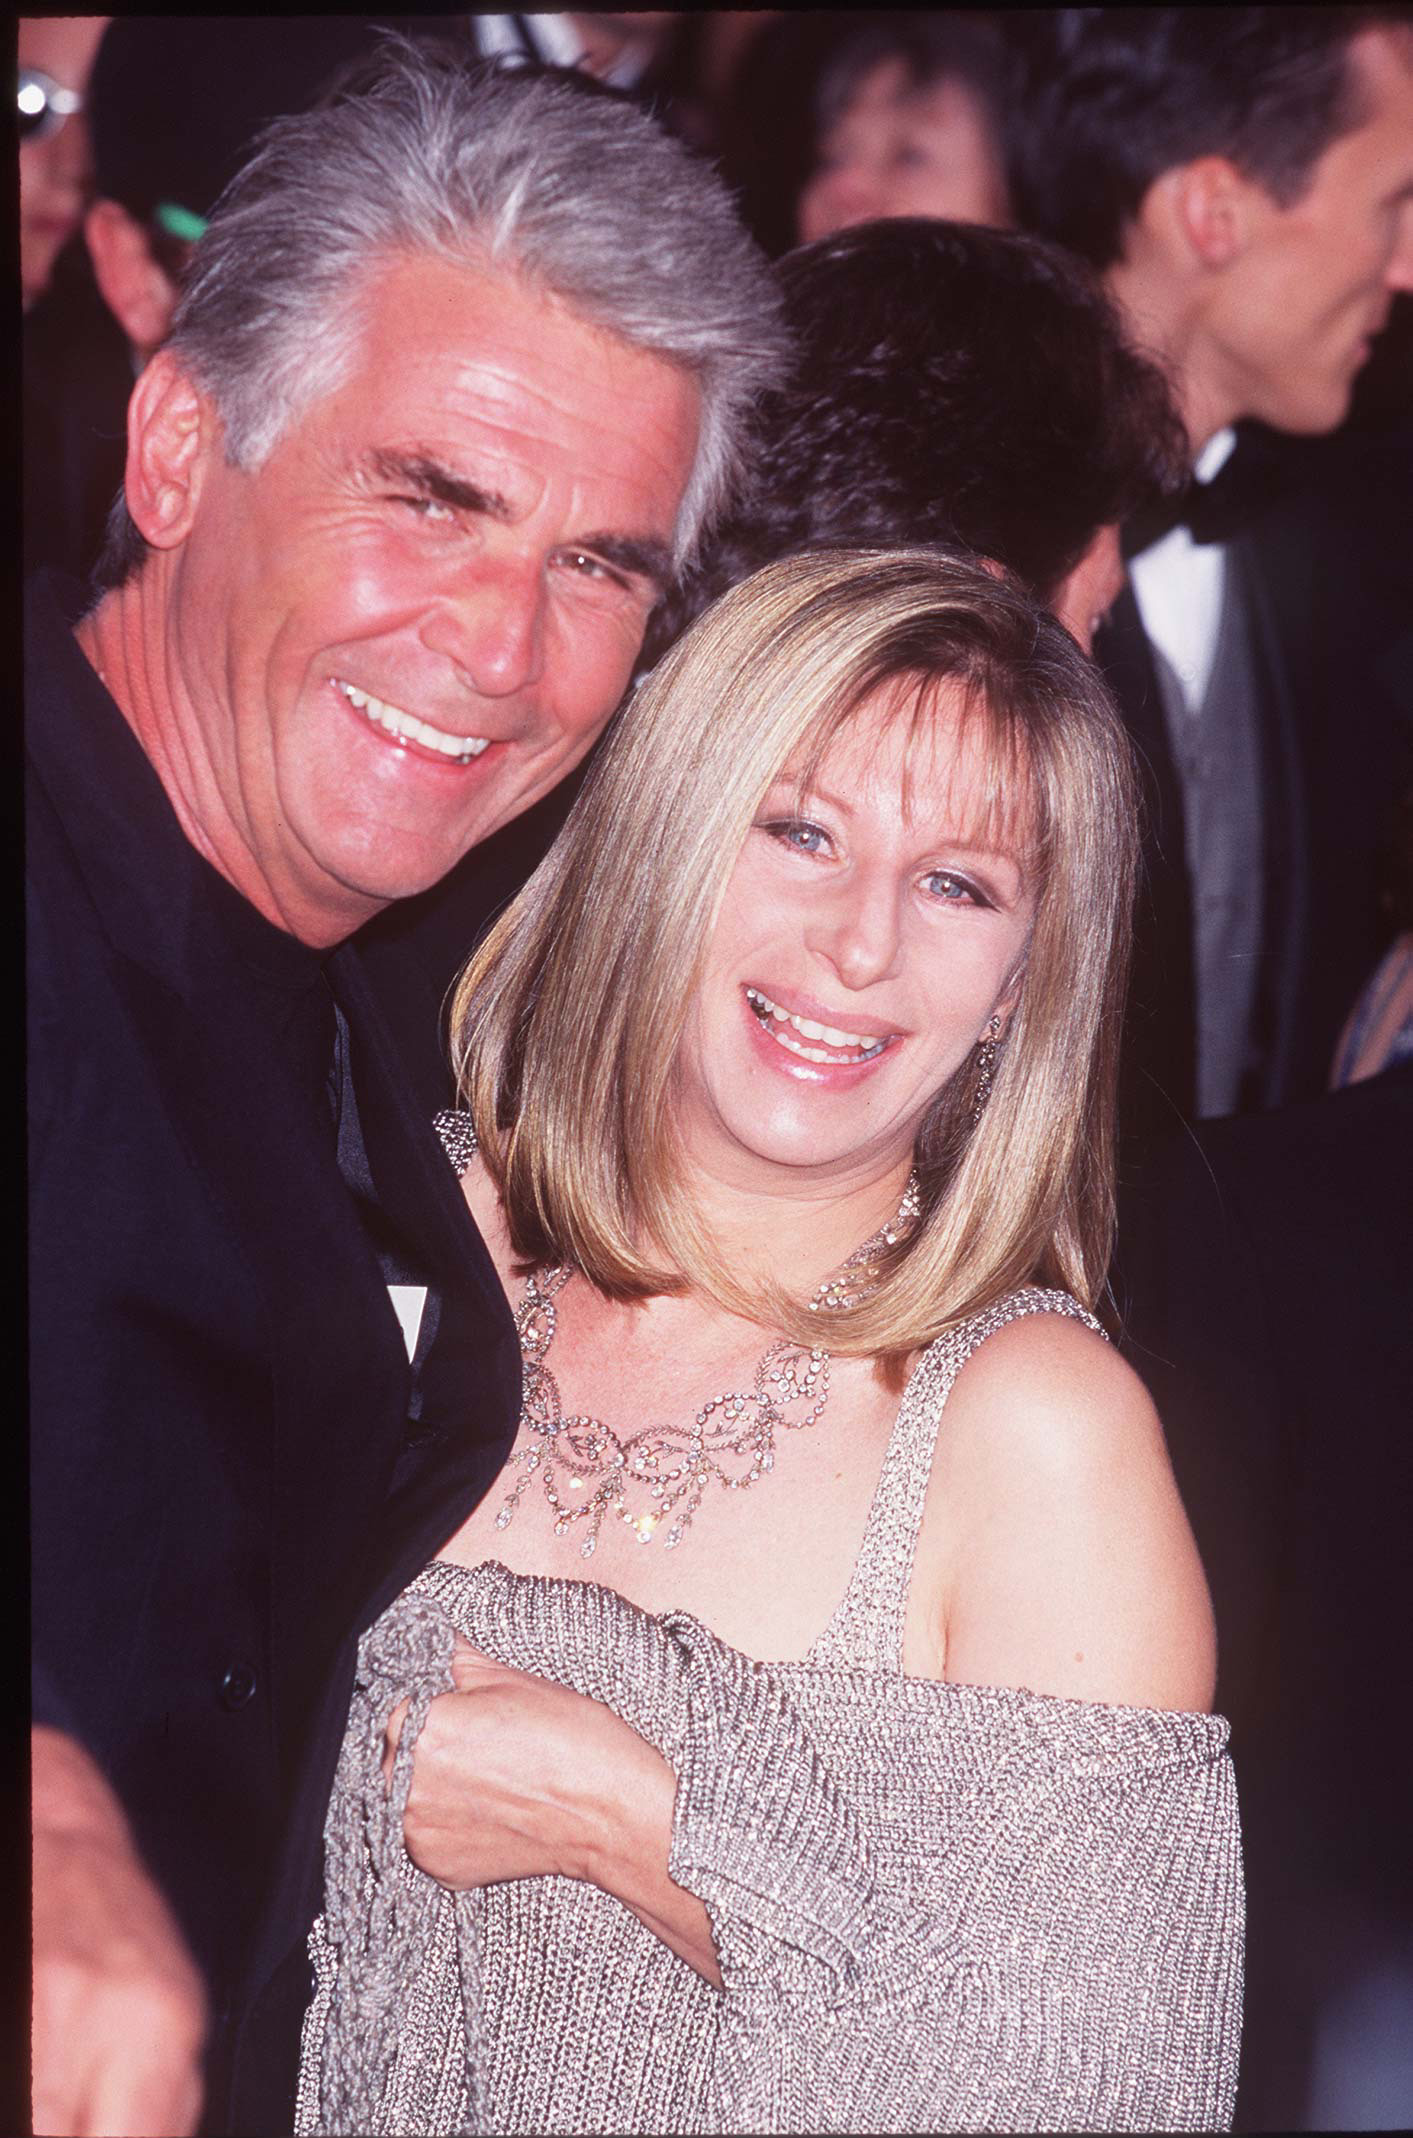 James Brolin and Barbra Streisand during The 69th Annual Academy Awards - Arrivals at Shrine Auditorium in Los Angeles, California, United States | Source: Getty Images